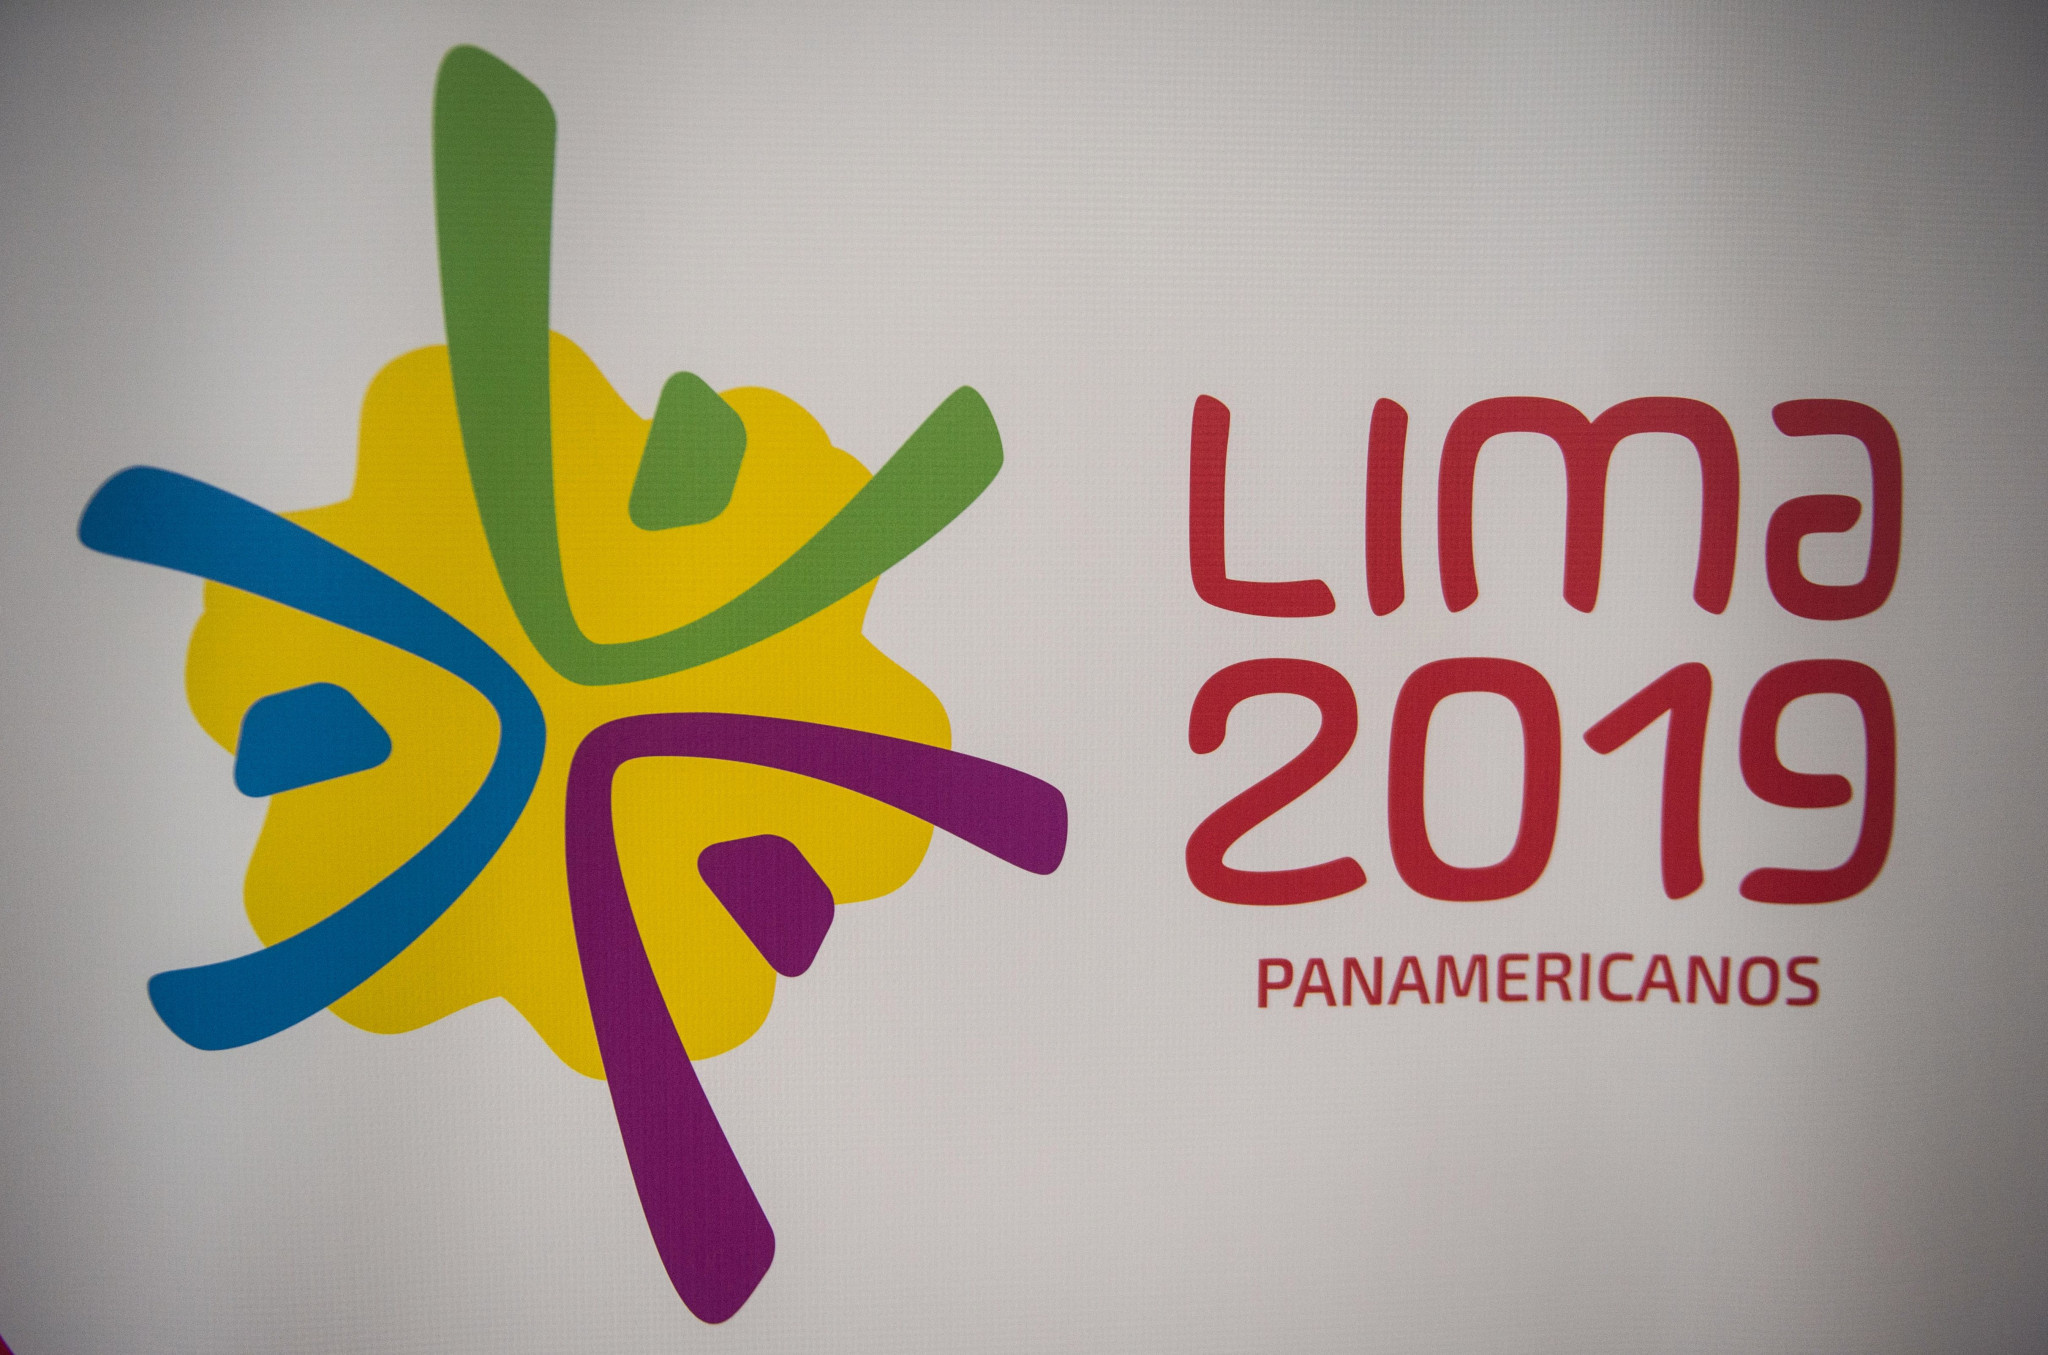 Congress approves project of exceptional measures to underpin organisation of Lima 2019